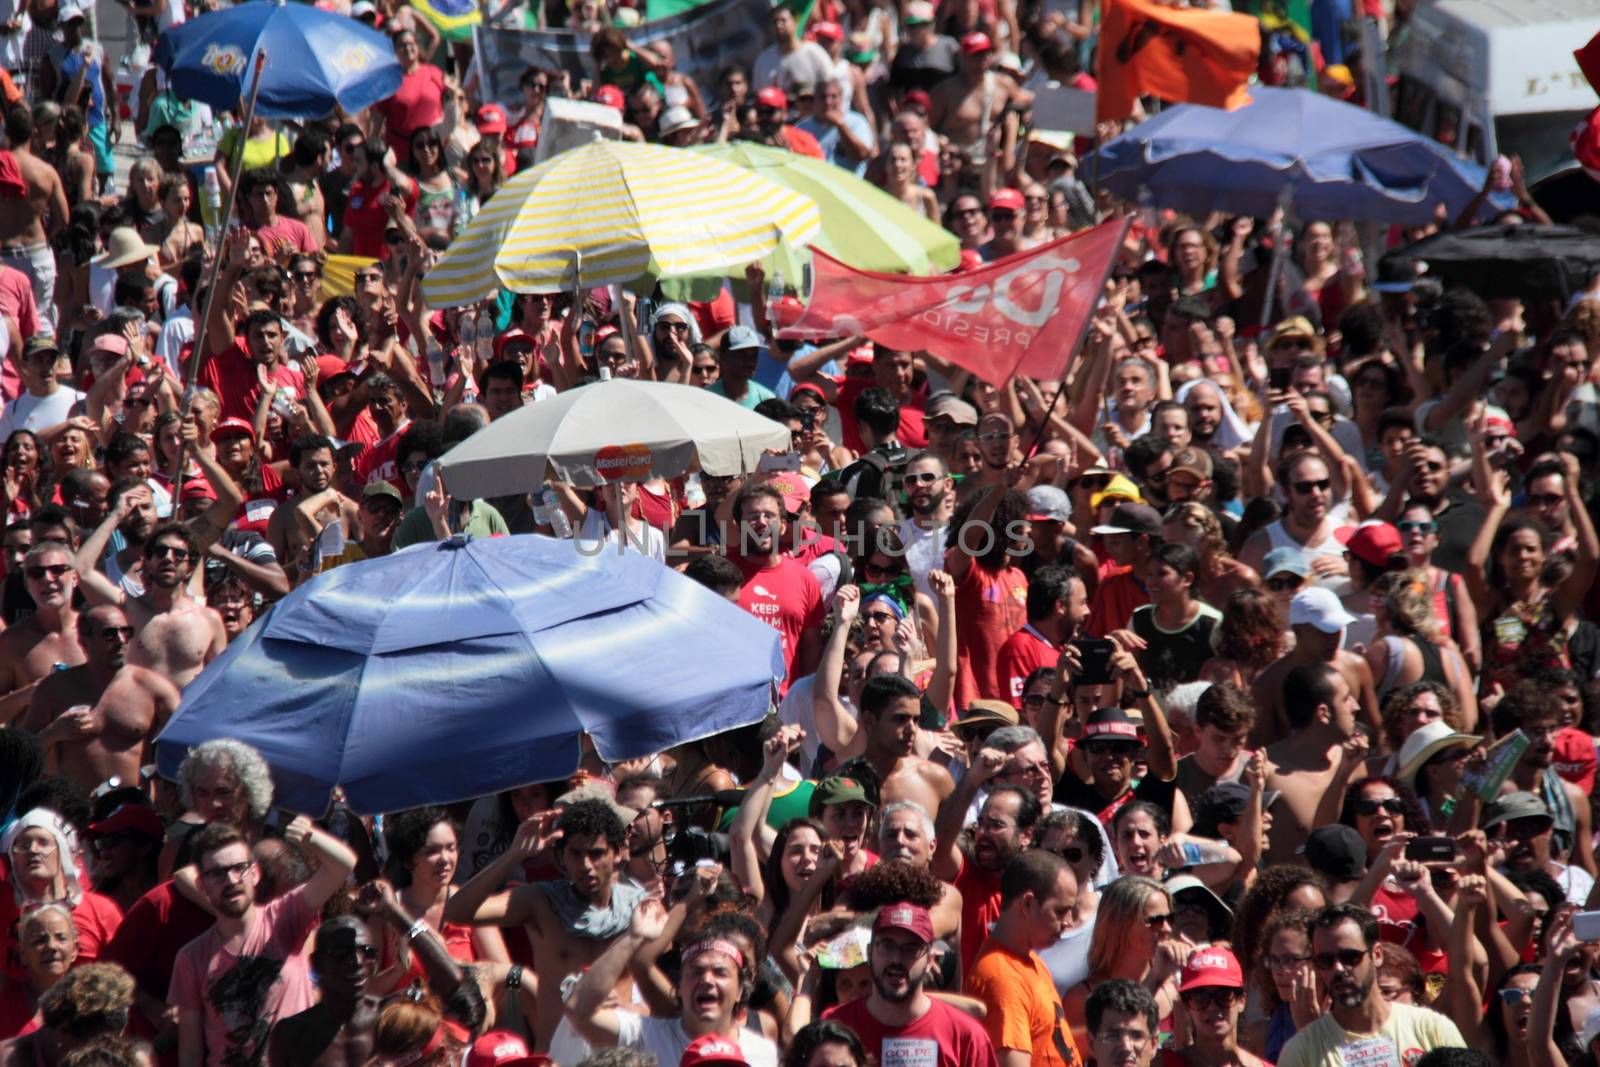 BRAZIL, Rio de Janeiro: Thousands of protesters marched at a rally at Copacabana Beach in Rio de Janeiro, Brazil on April 17, 2016, against the impeachment of President Dilma Rousseff. Rousseff faces an impeachment vote today over charges of manipulating government accounts. Brazil's lower house is voting on whether to continue impeachment proceedings. 342 out of 513 votes are needed to continue the proceedings to the upper house.